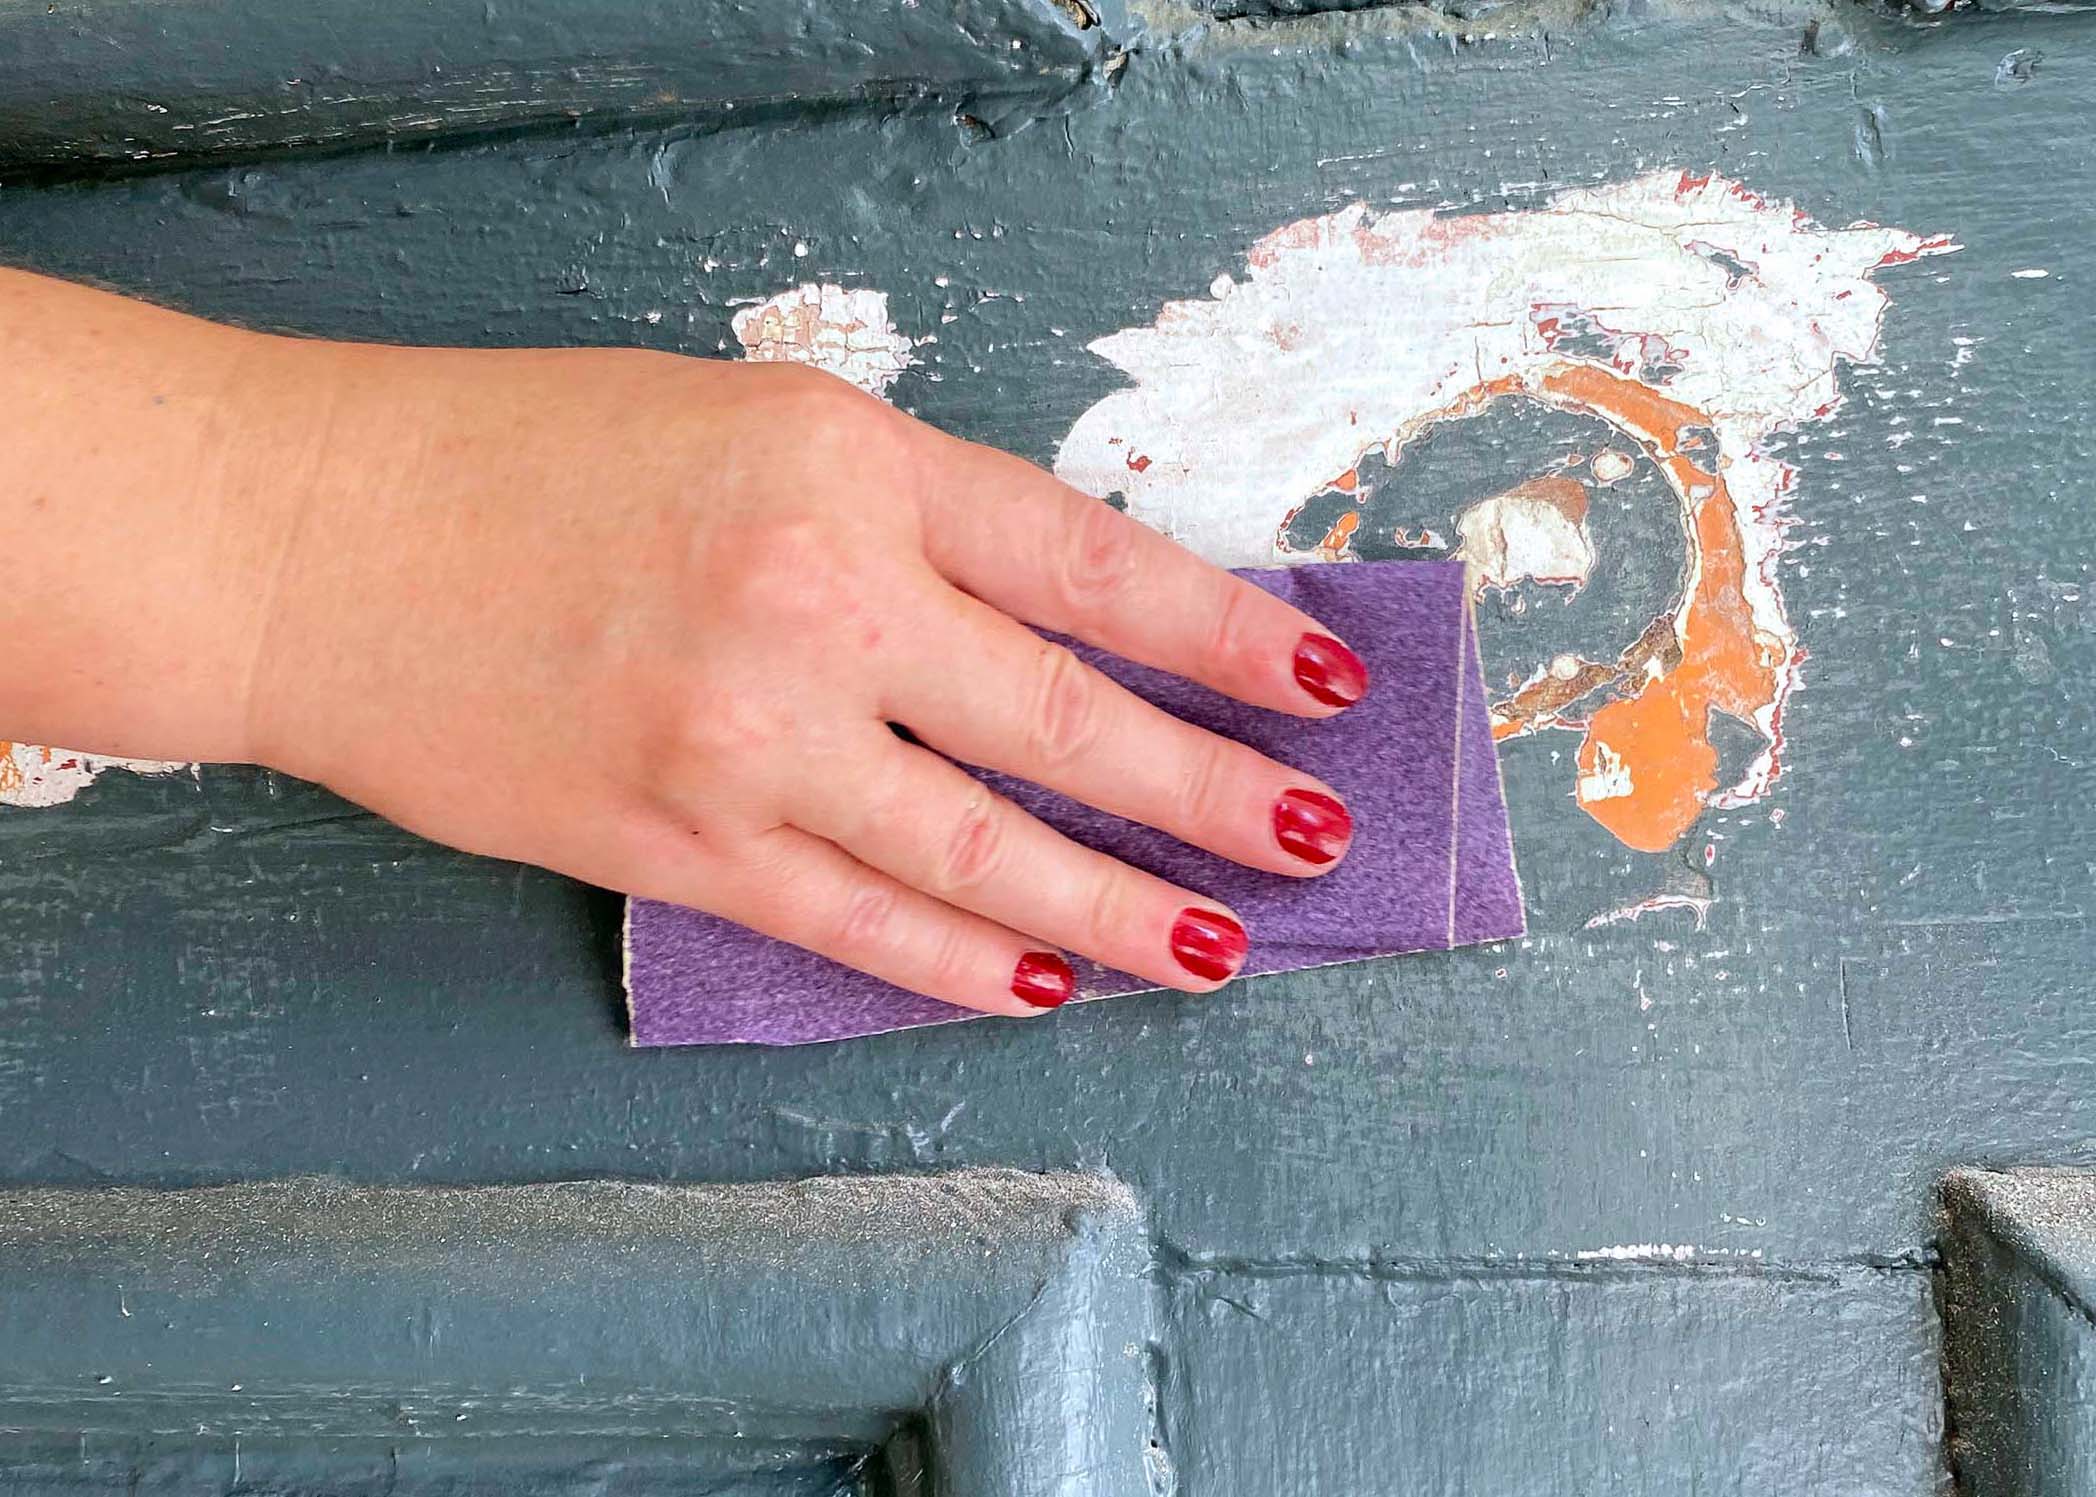 How to Paint a Front Door: Sanding and Prepping your surface for painting. 